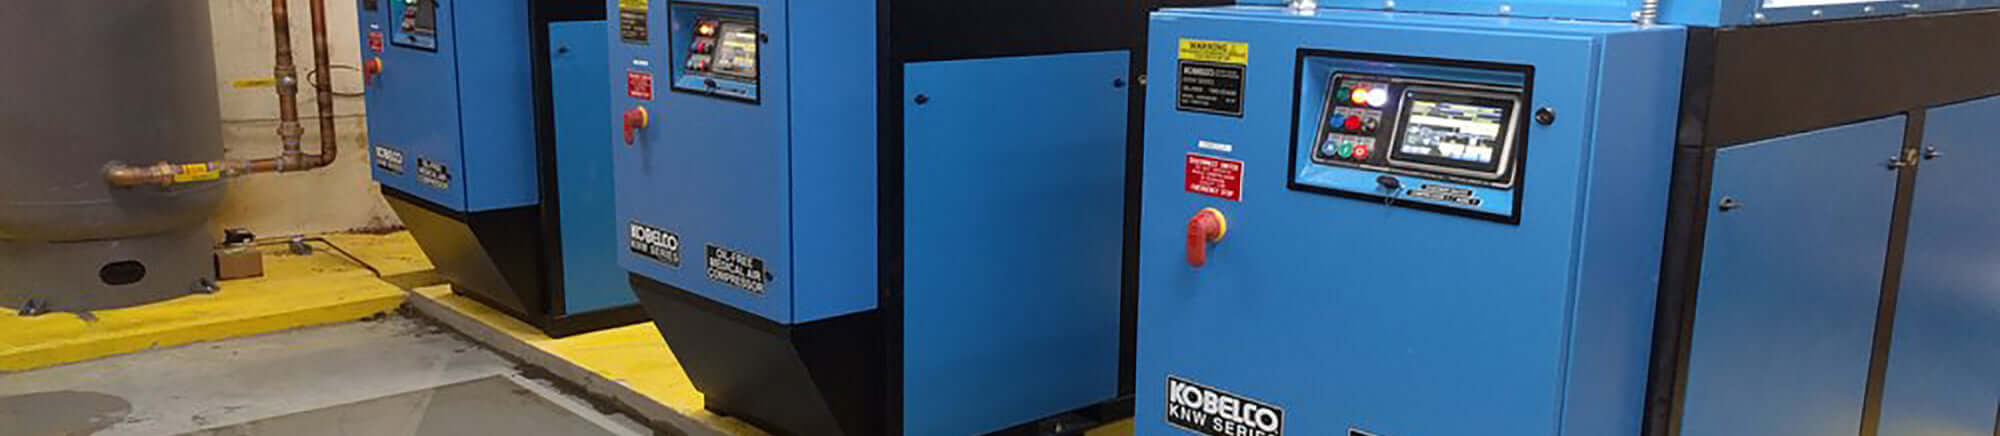 Rogers Machinery Company air compressors, pumps, blowers, and vacuum system FAQ page